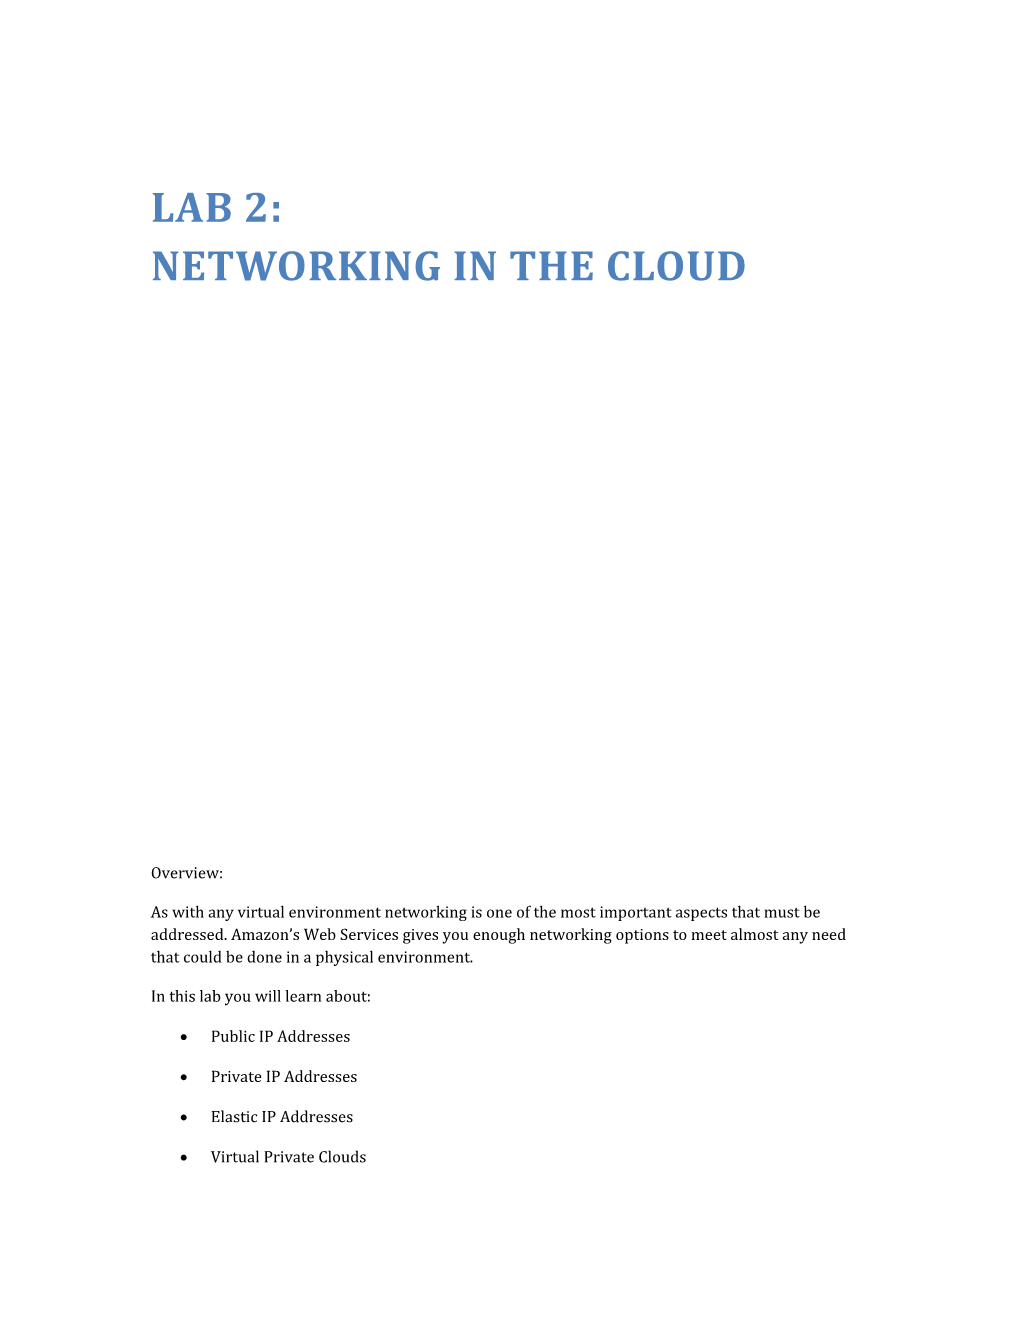 Lab 2: Networking in the Cloud